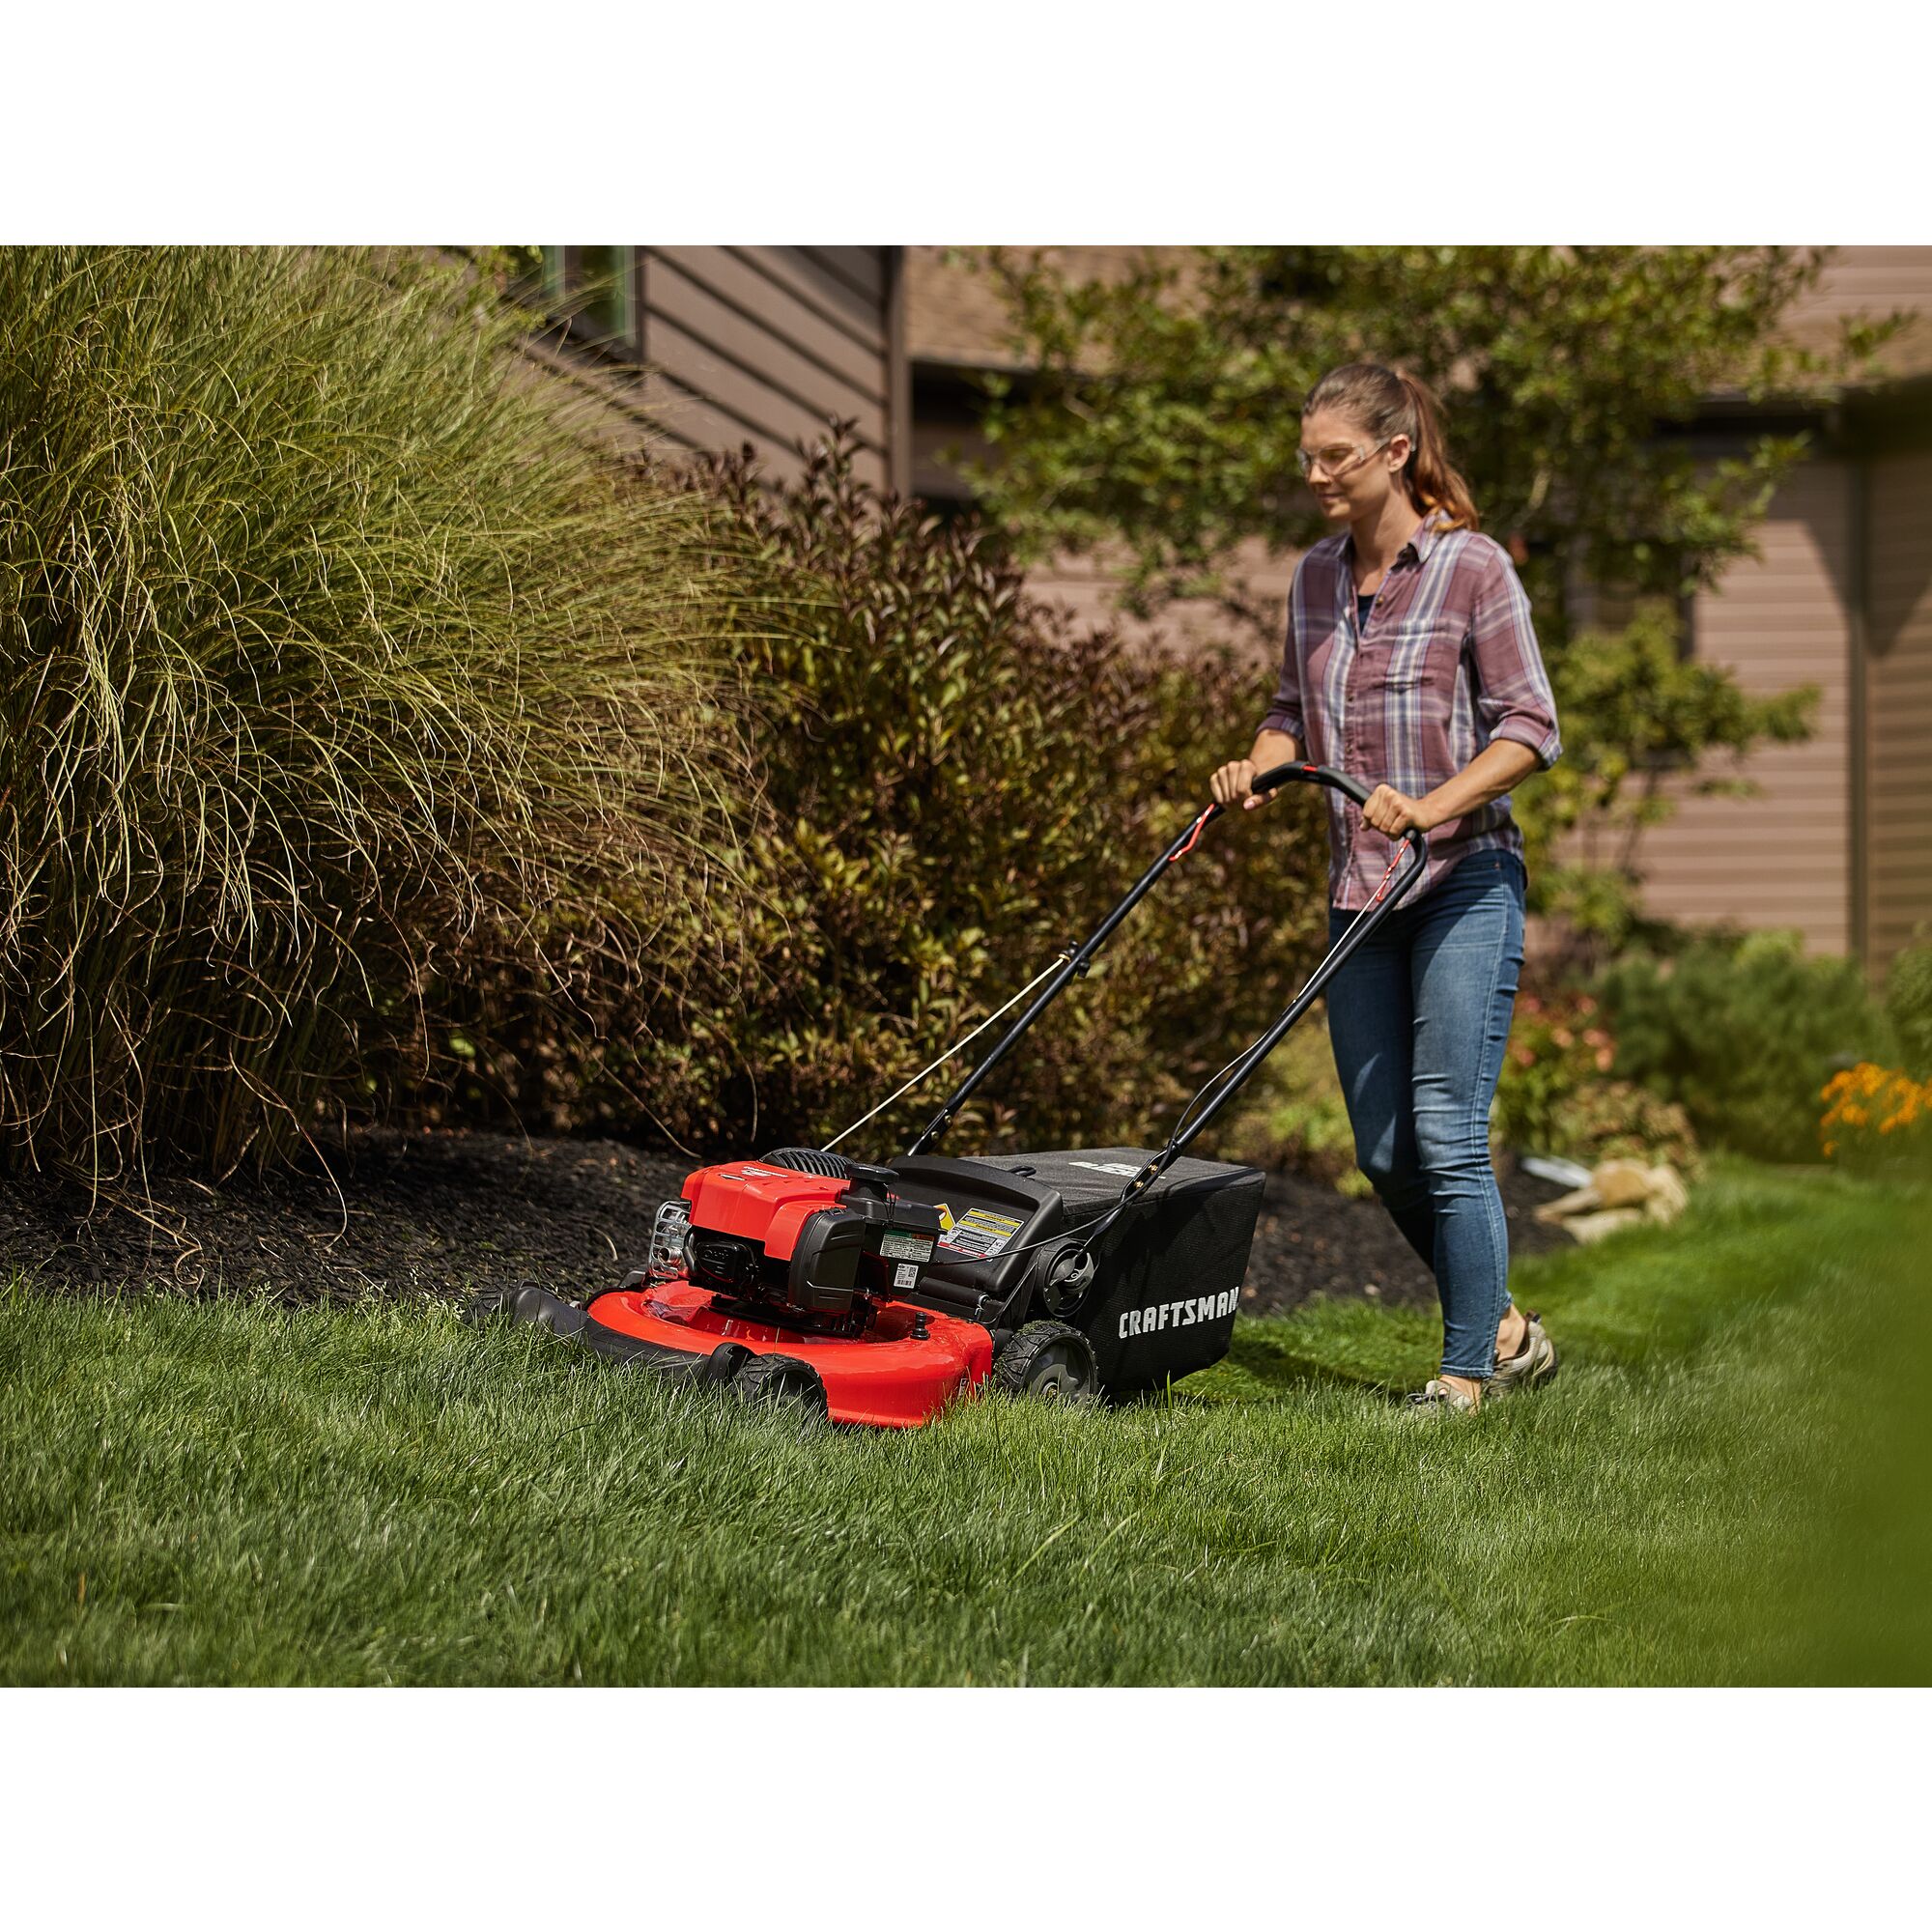 CRAFTSMAN 21-in 150cc Push Mower mowing grass around bushes in side view in plaid and jeans